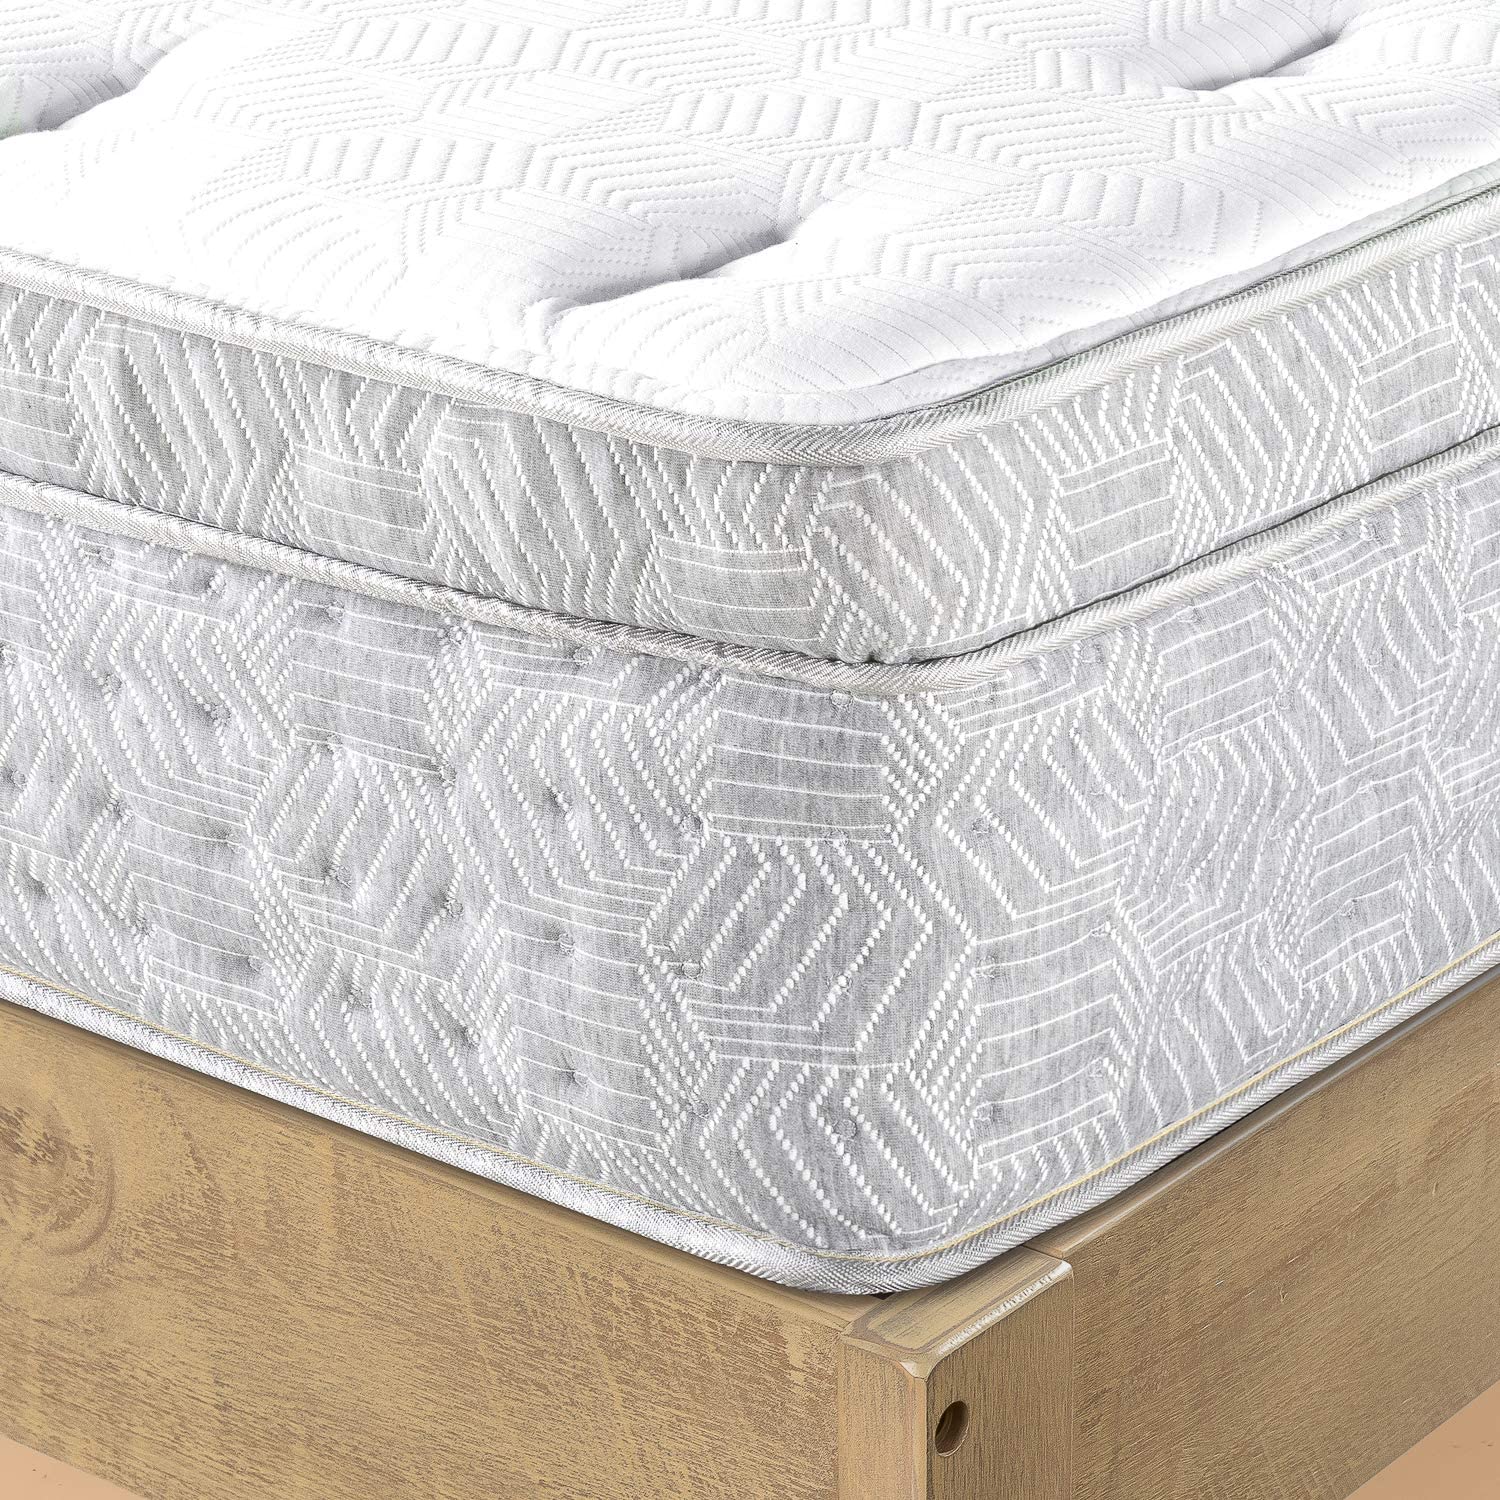 ZINUS 12 Inch Euro Top Pocket Spring Hybrid Mattress / Pressure Relief / Pocket Innersprings for Motion Isolation / Bed-in-a-Box, Full